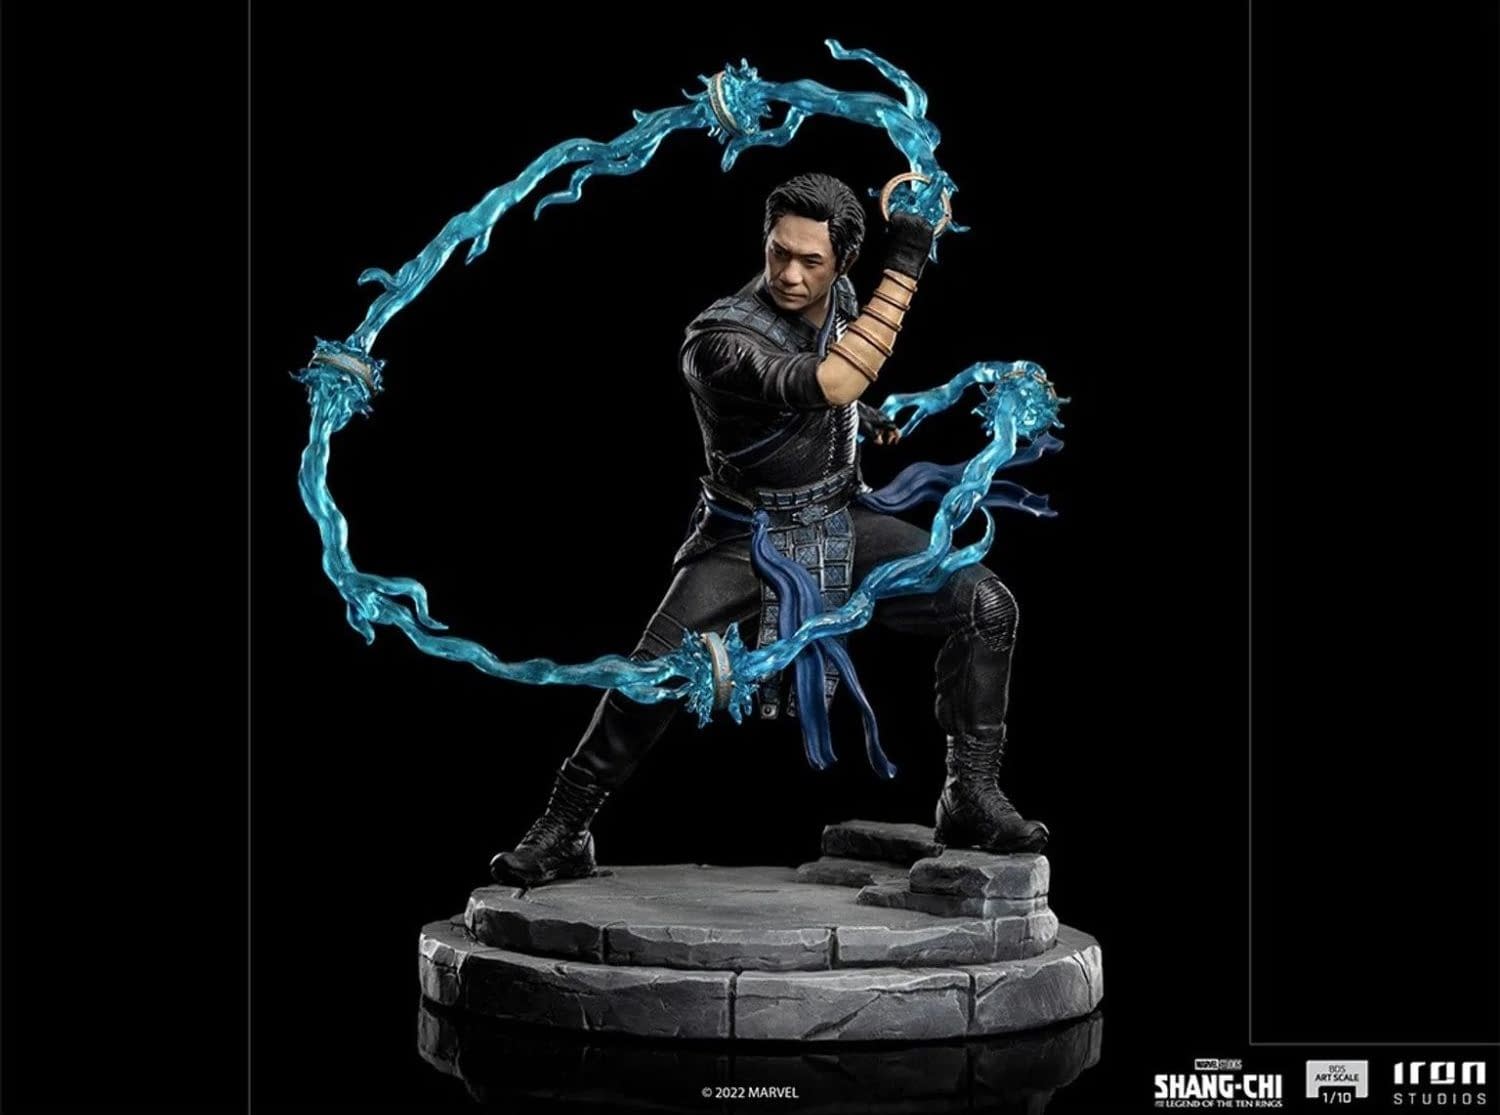 Iron Studios Debuts Their Next MCU Shang-Chi Statue with Wenwu